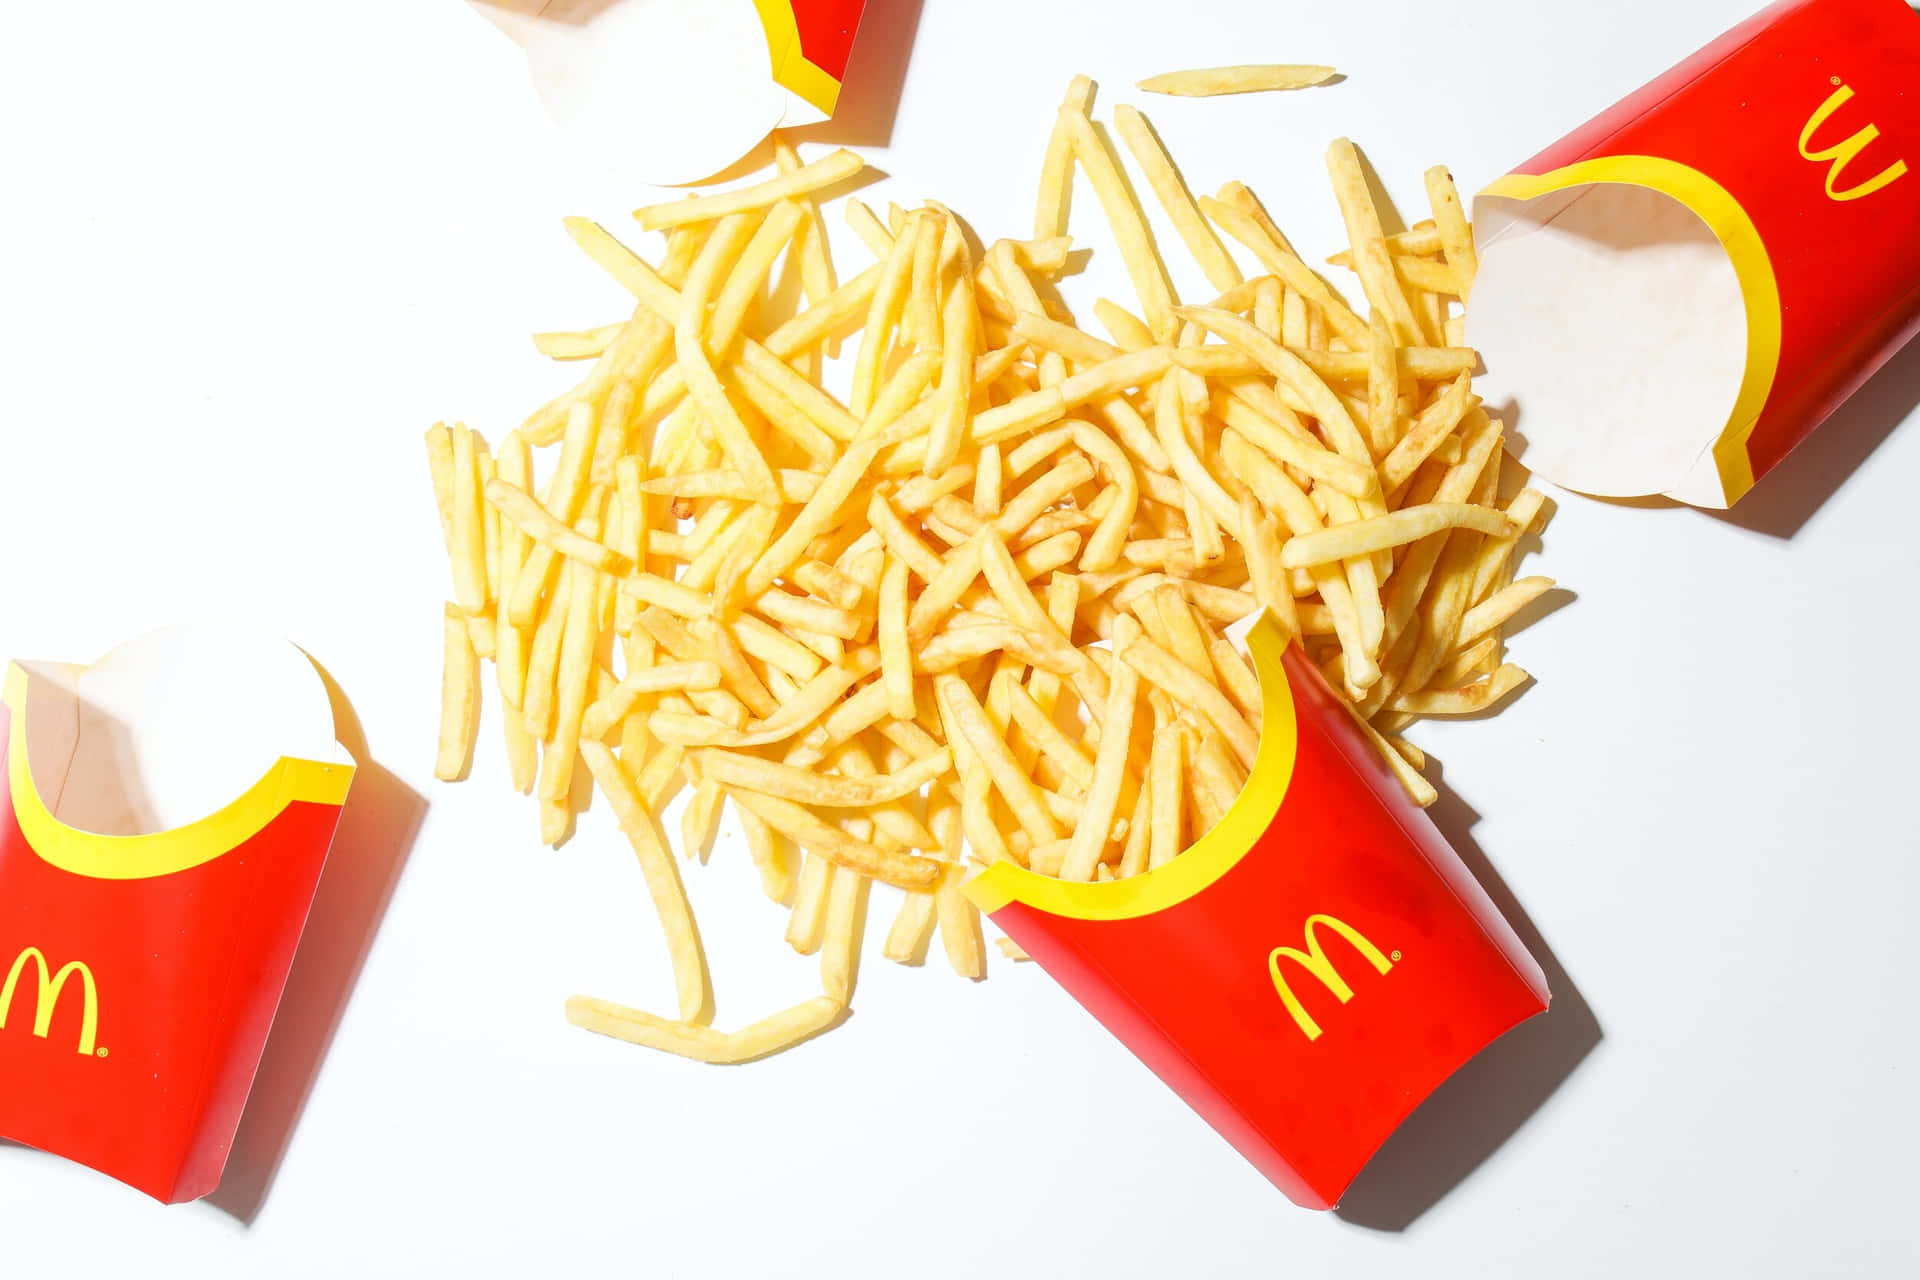 Mcdonald's French Fries Are Thrown Out Of A Bag